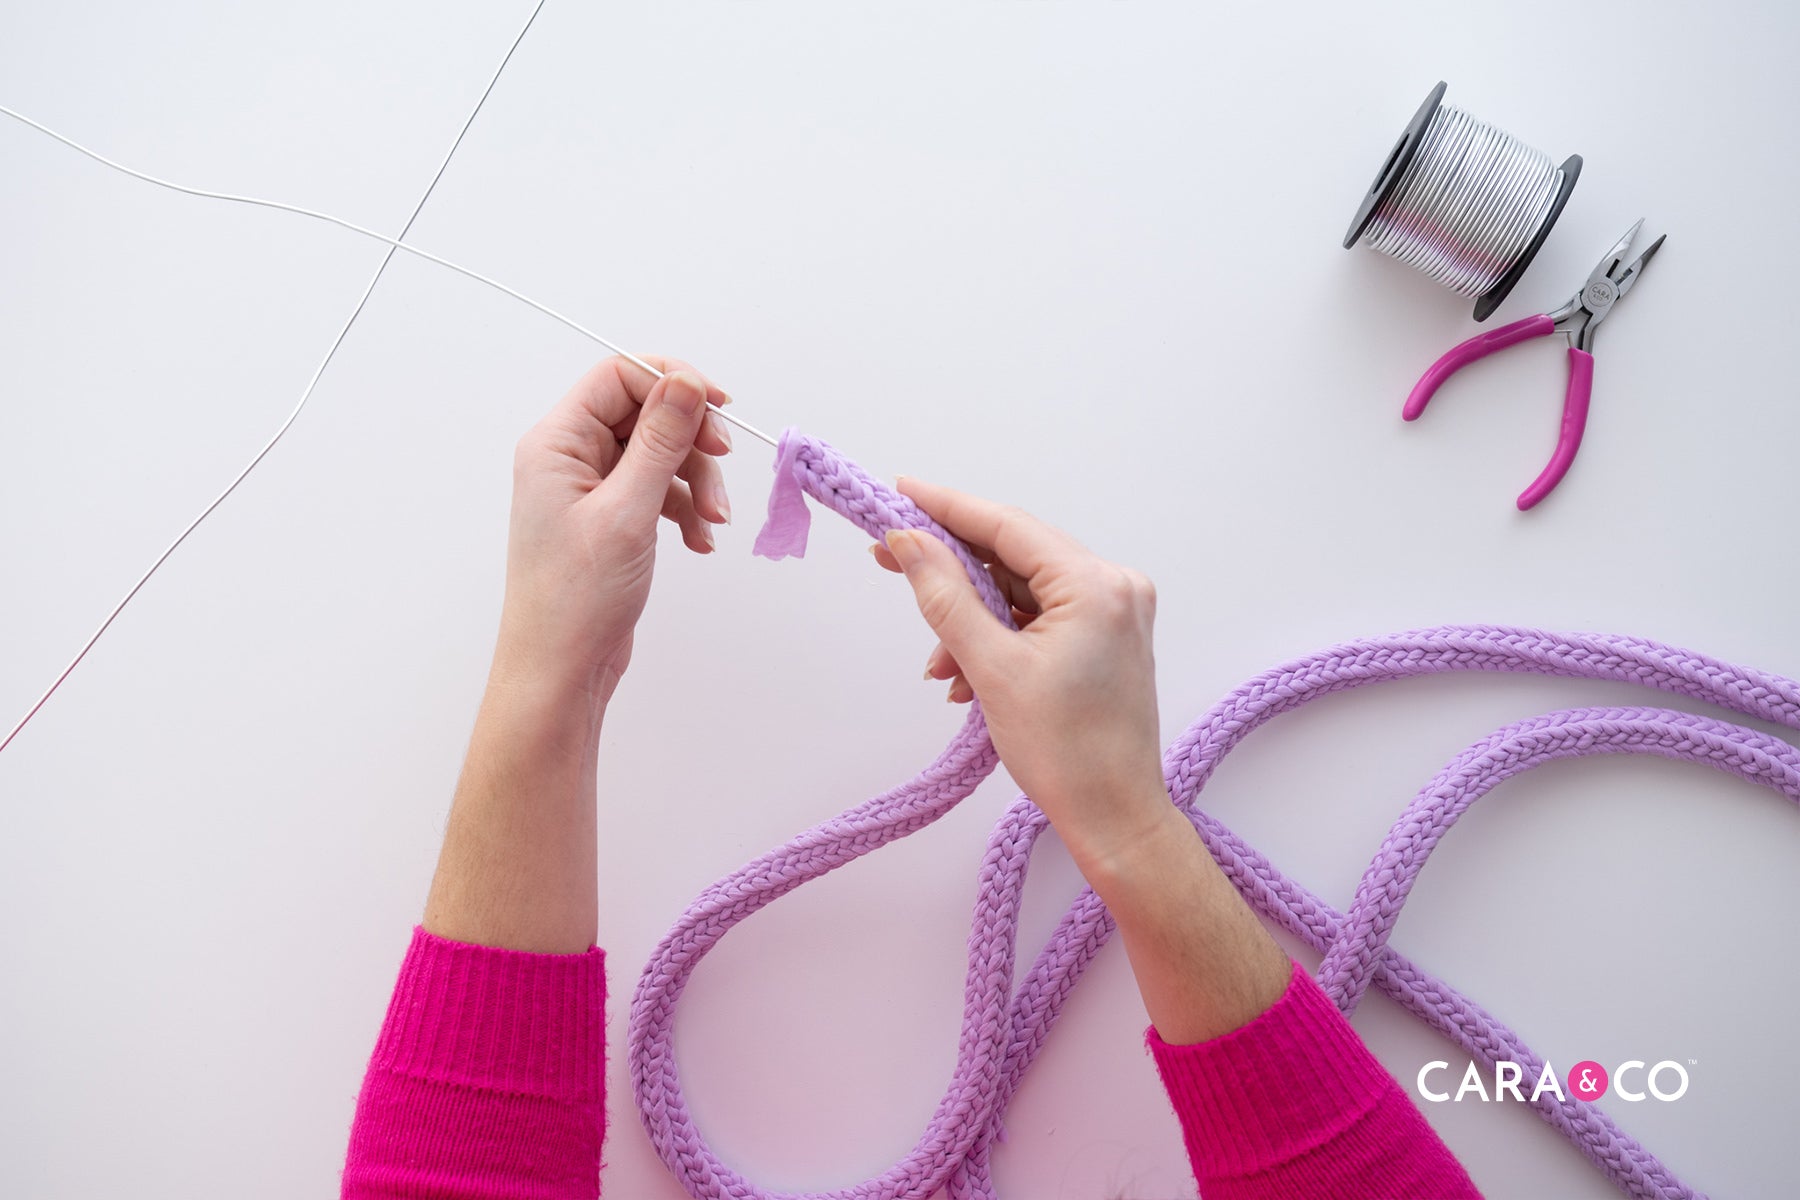 Wiring your Rope Letter - Cara & Co